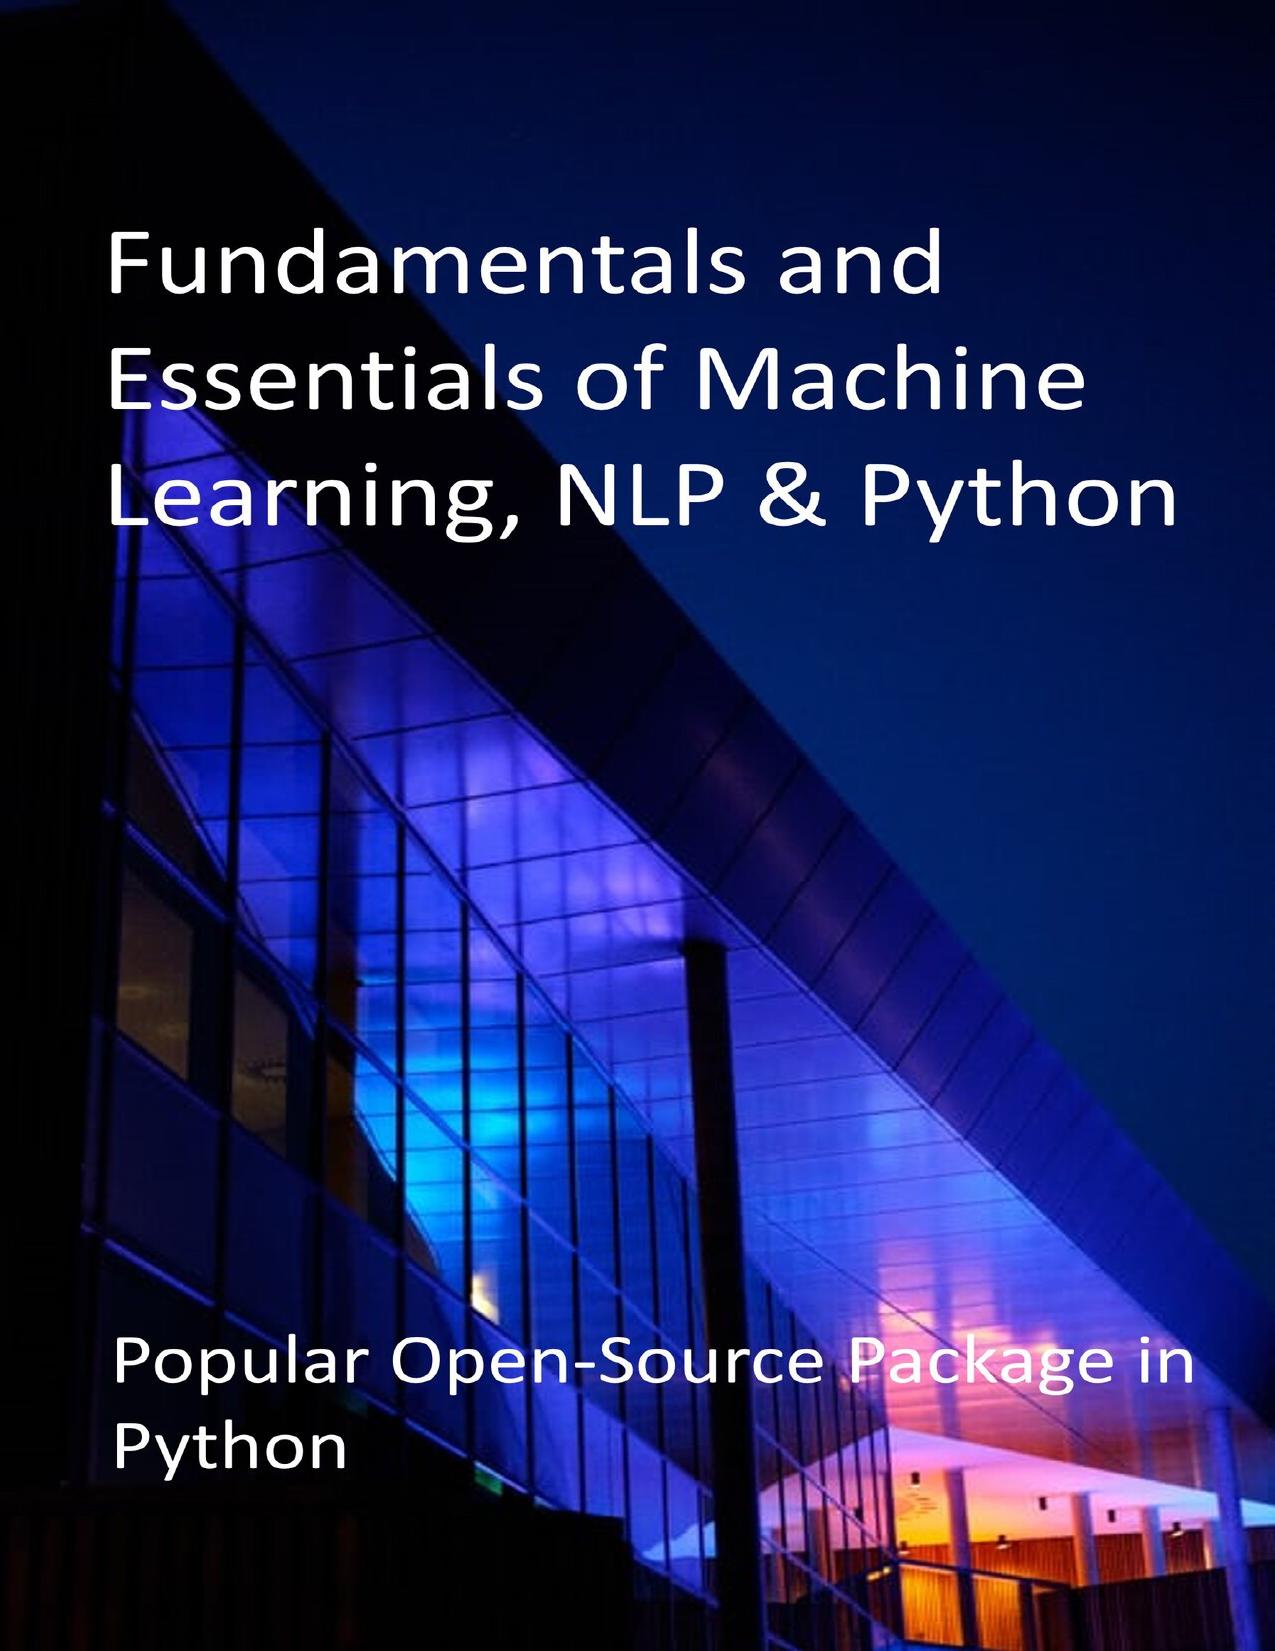 Fundamentals and Essentials of Machine Learning, NLP & Python: Popular Open-Source Package in Python by Zyrincho Natt Publications